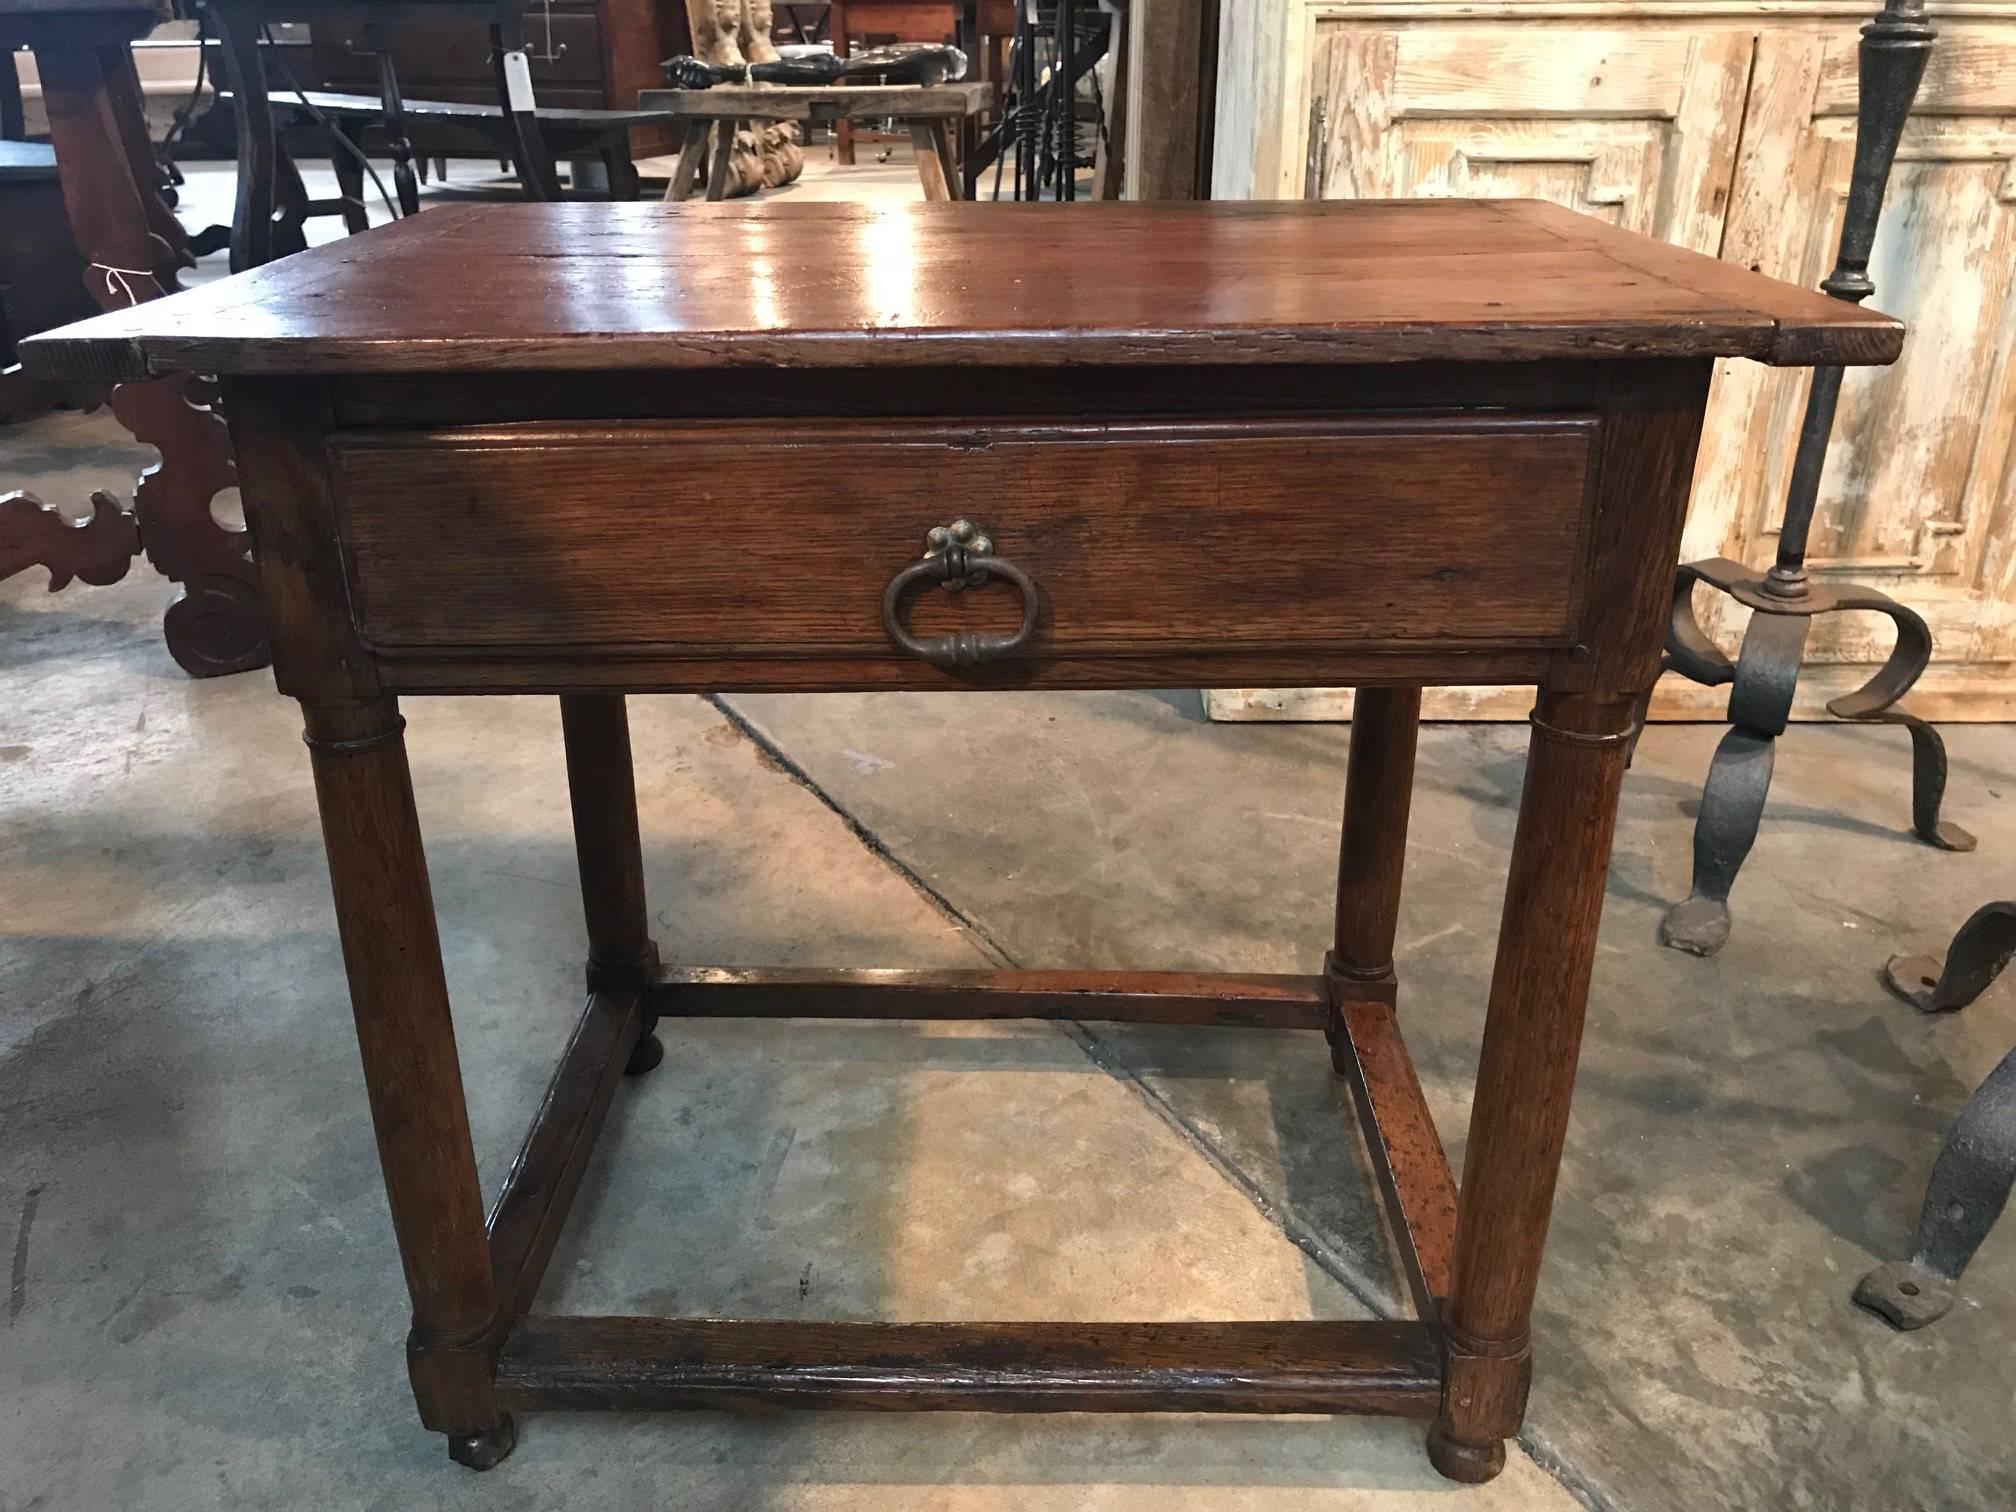 A very beautiful early 19th century side table from the Provence region is France. Wonderfully constructed from chestnut - with baluster shaped legs and a single drawer. Terrific patina.